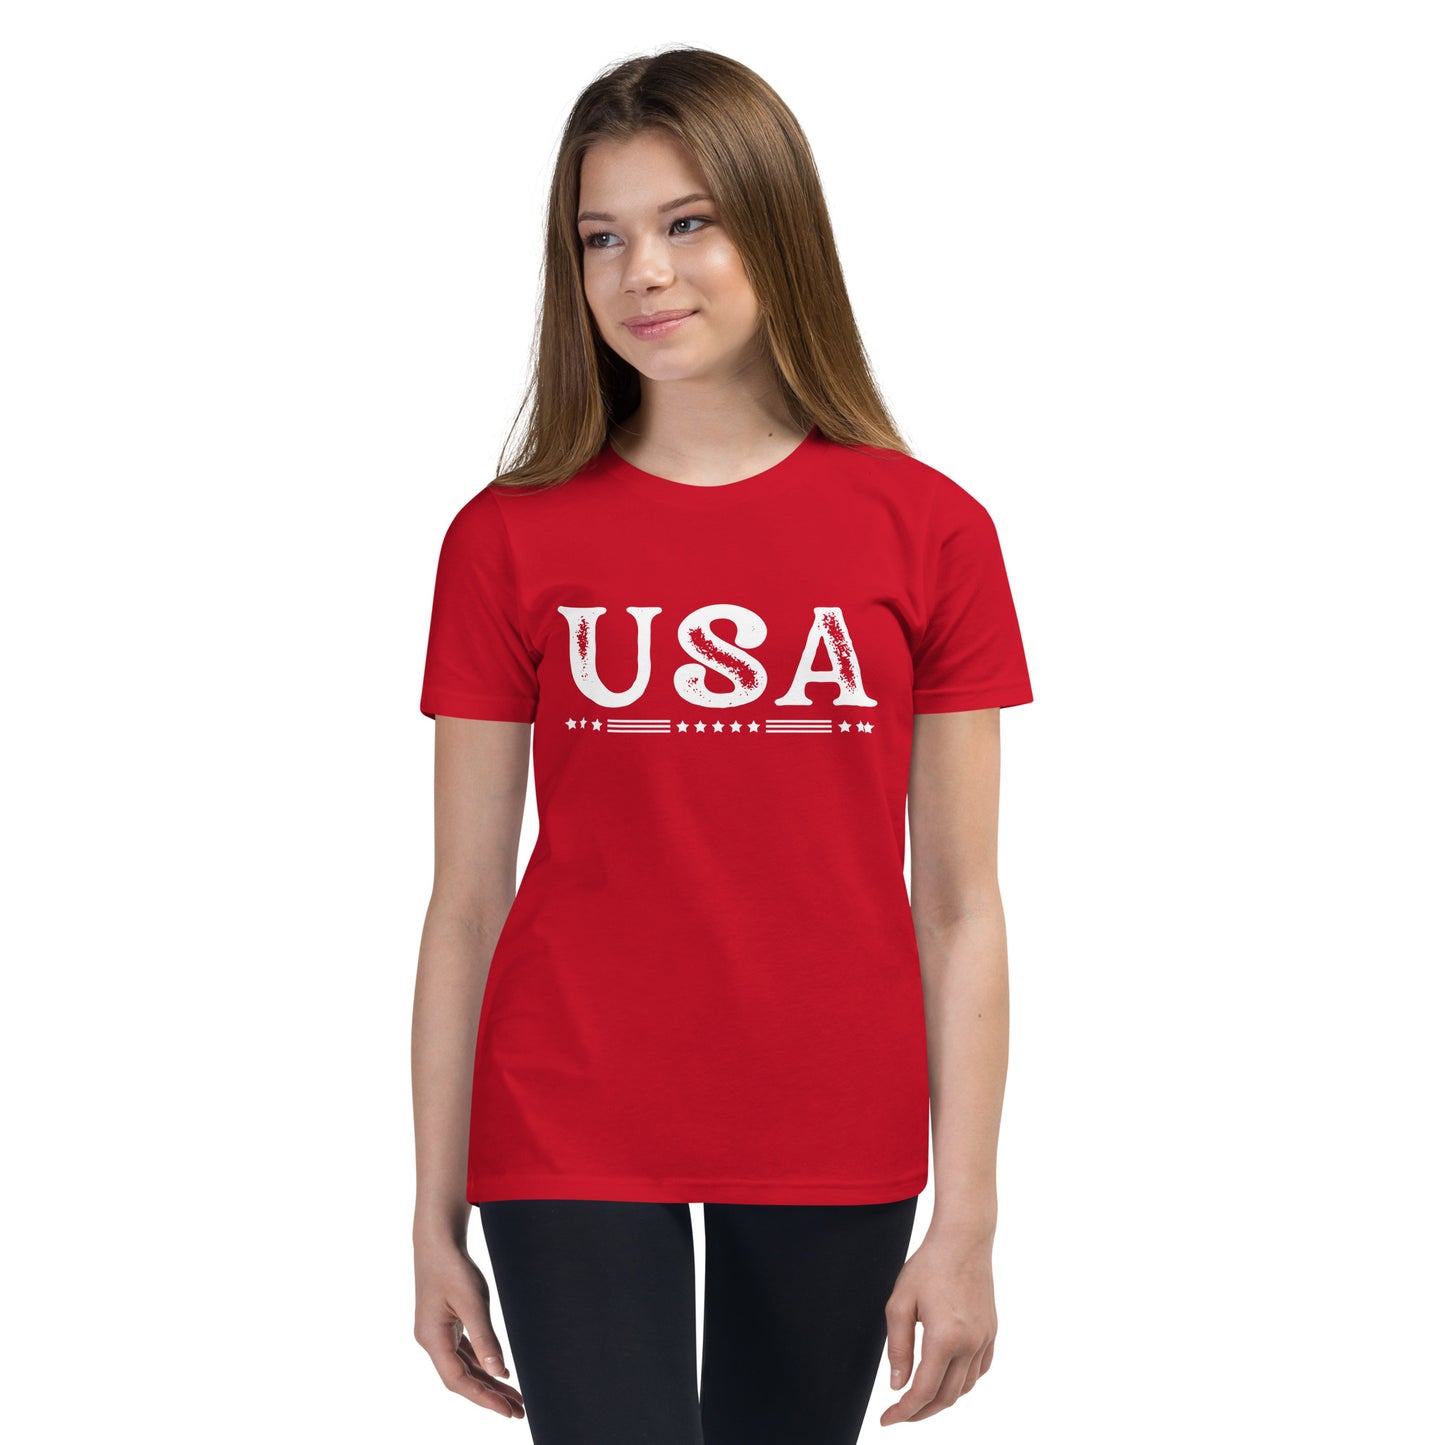 USA Youth 4th of July T-shirt